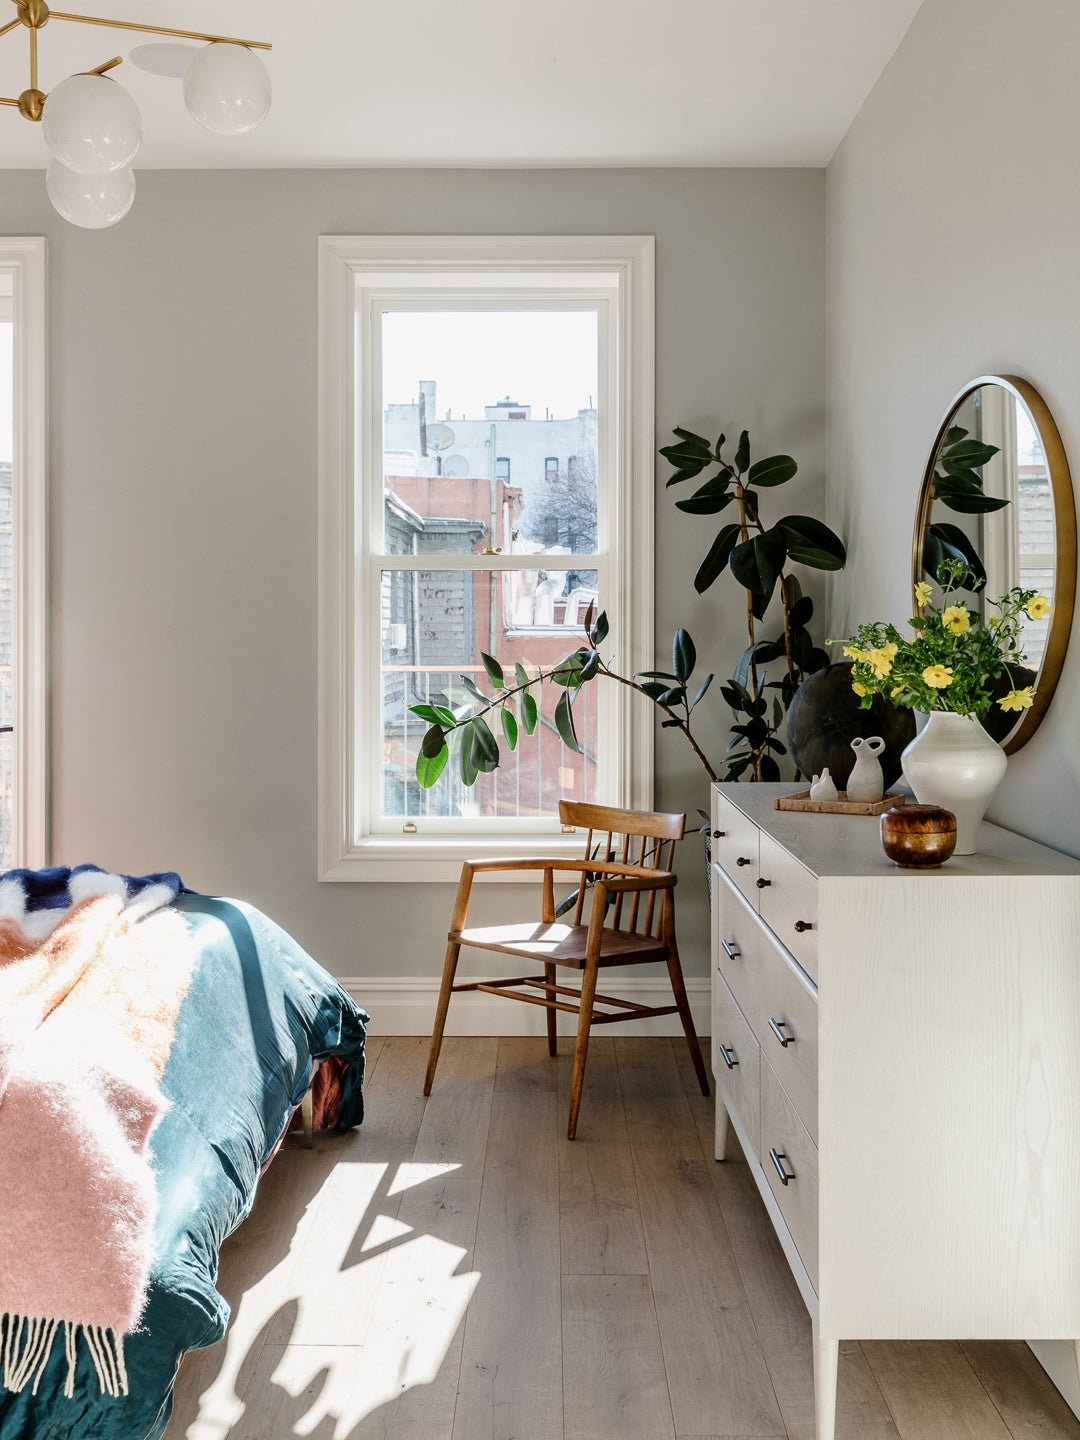 The Best Plants for Bedrooms Are What All of These Sleep-Friendly Spaces Have in Common